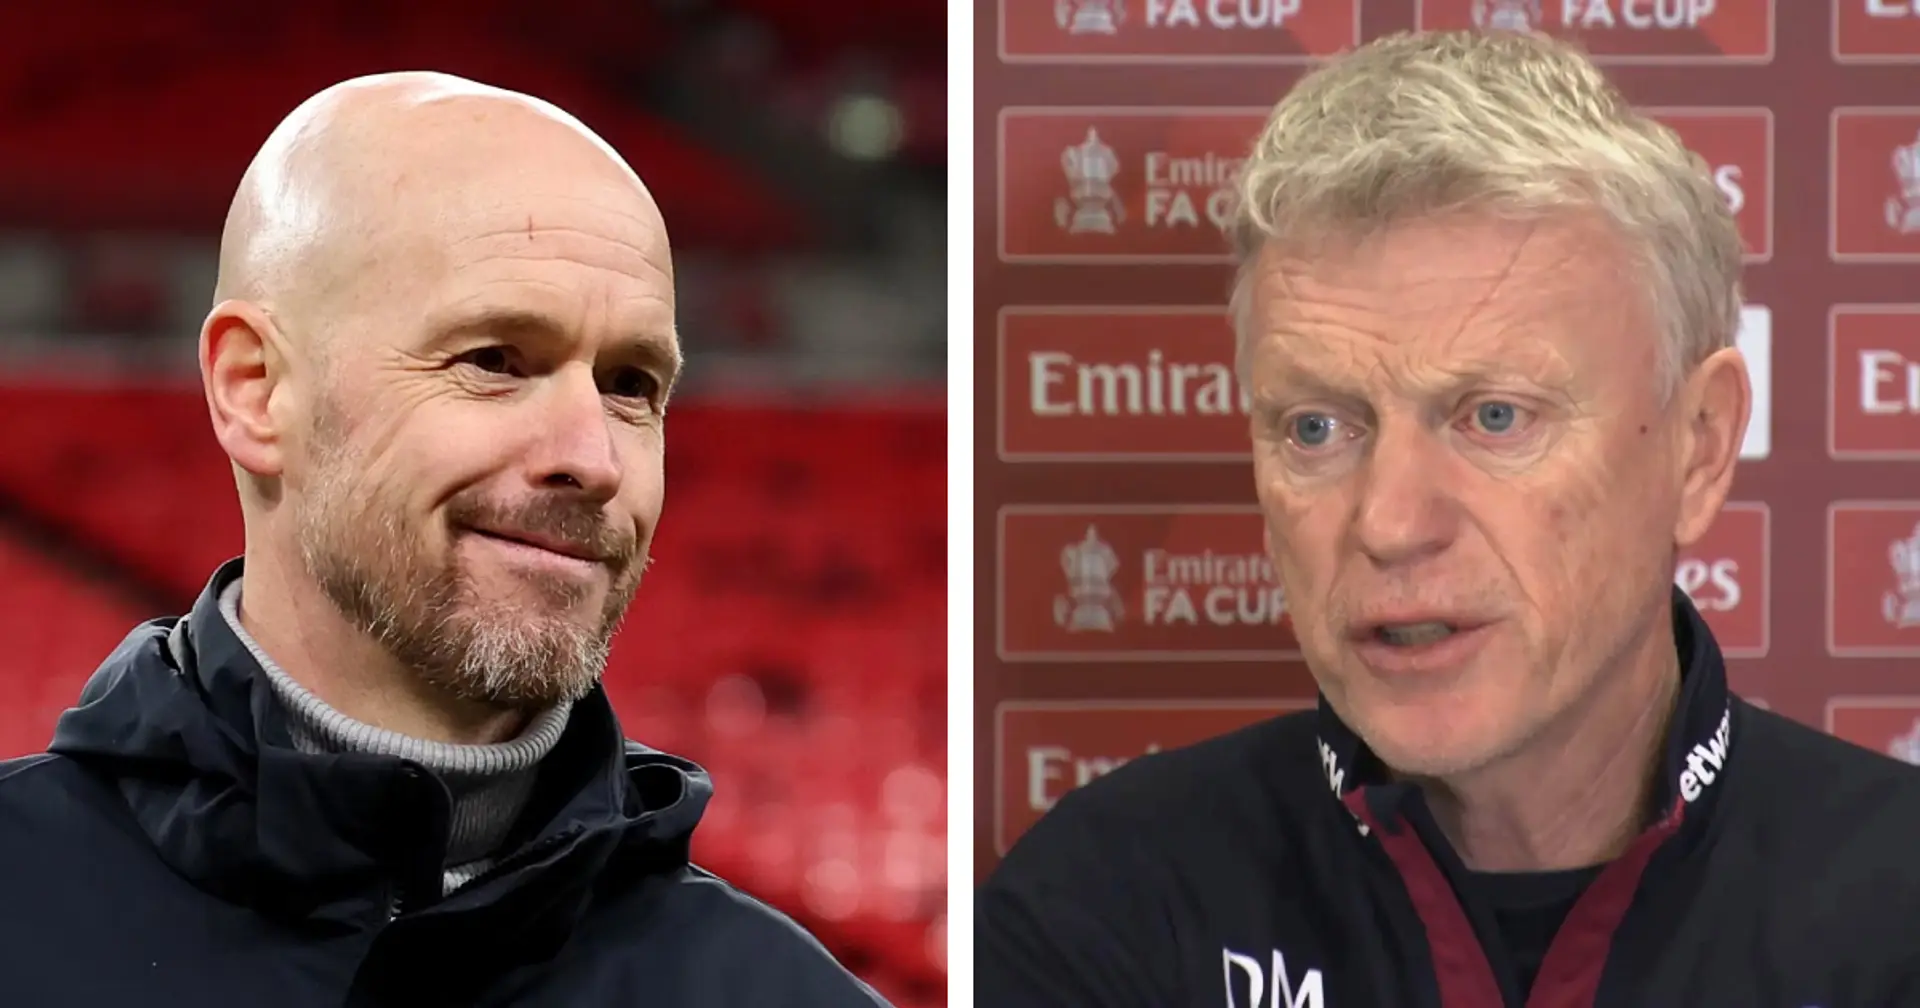 'I can only look from a distance': David Moyes rates Erik ten Hag's spell at United